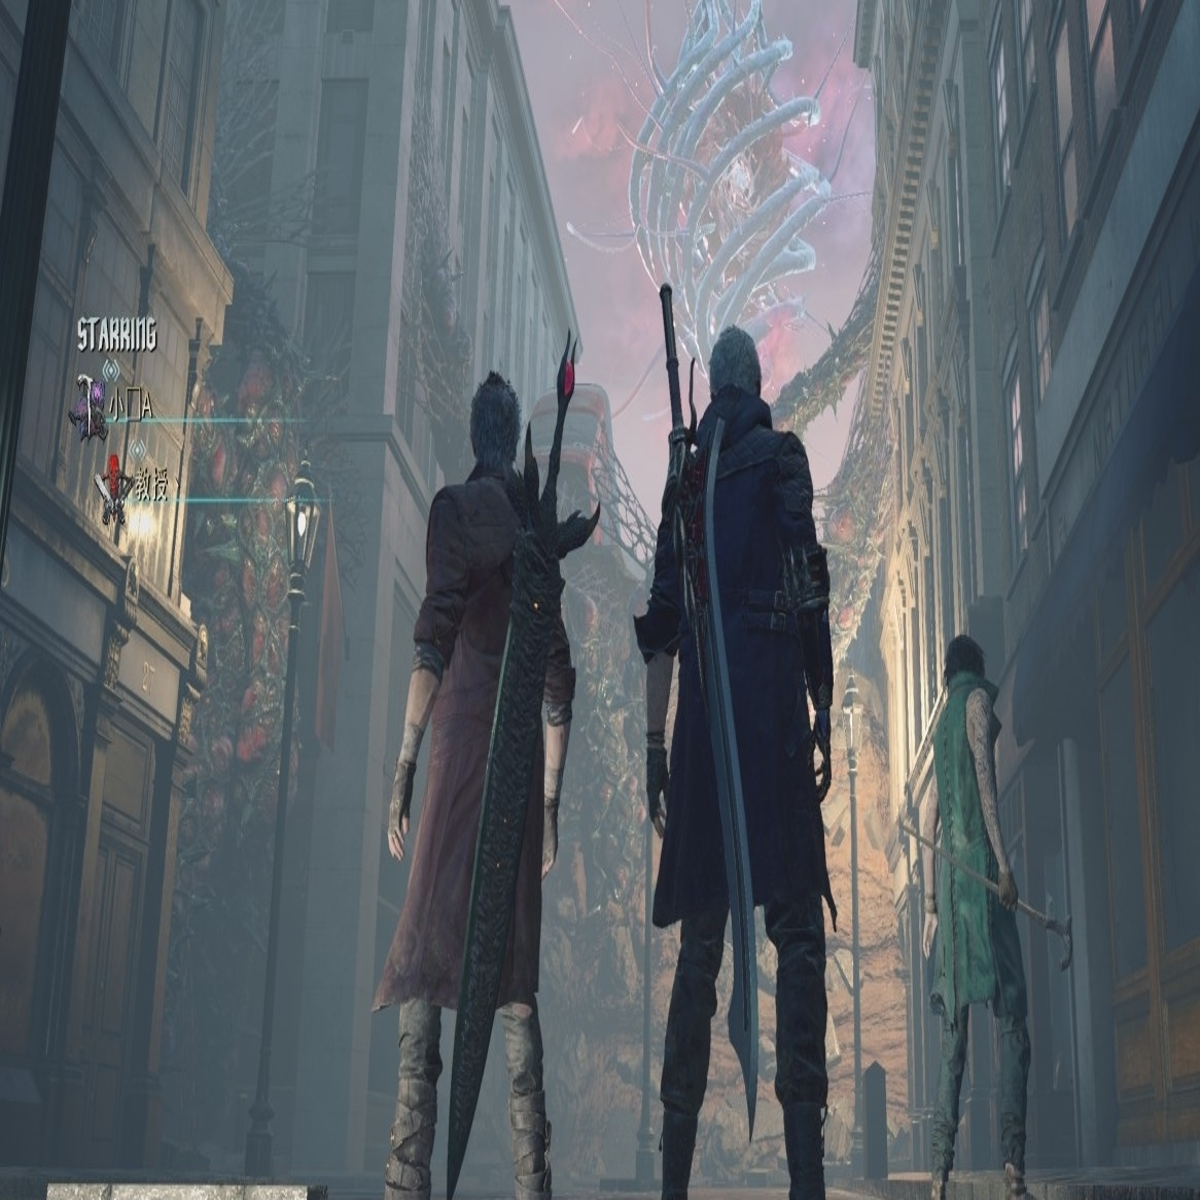 Devil May Cry 5 PC Mods